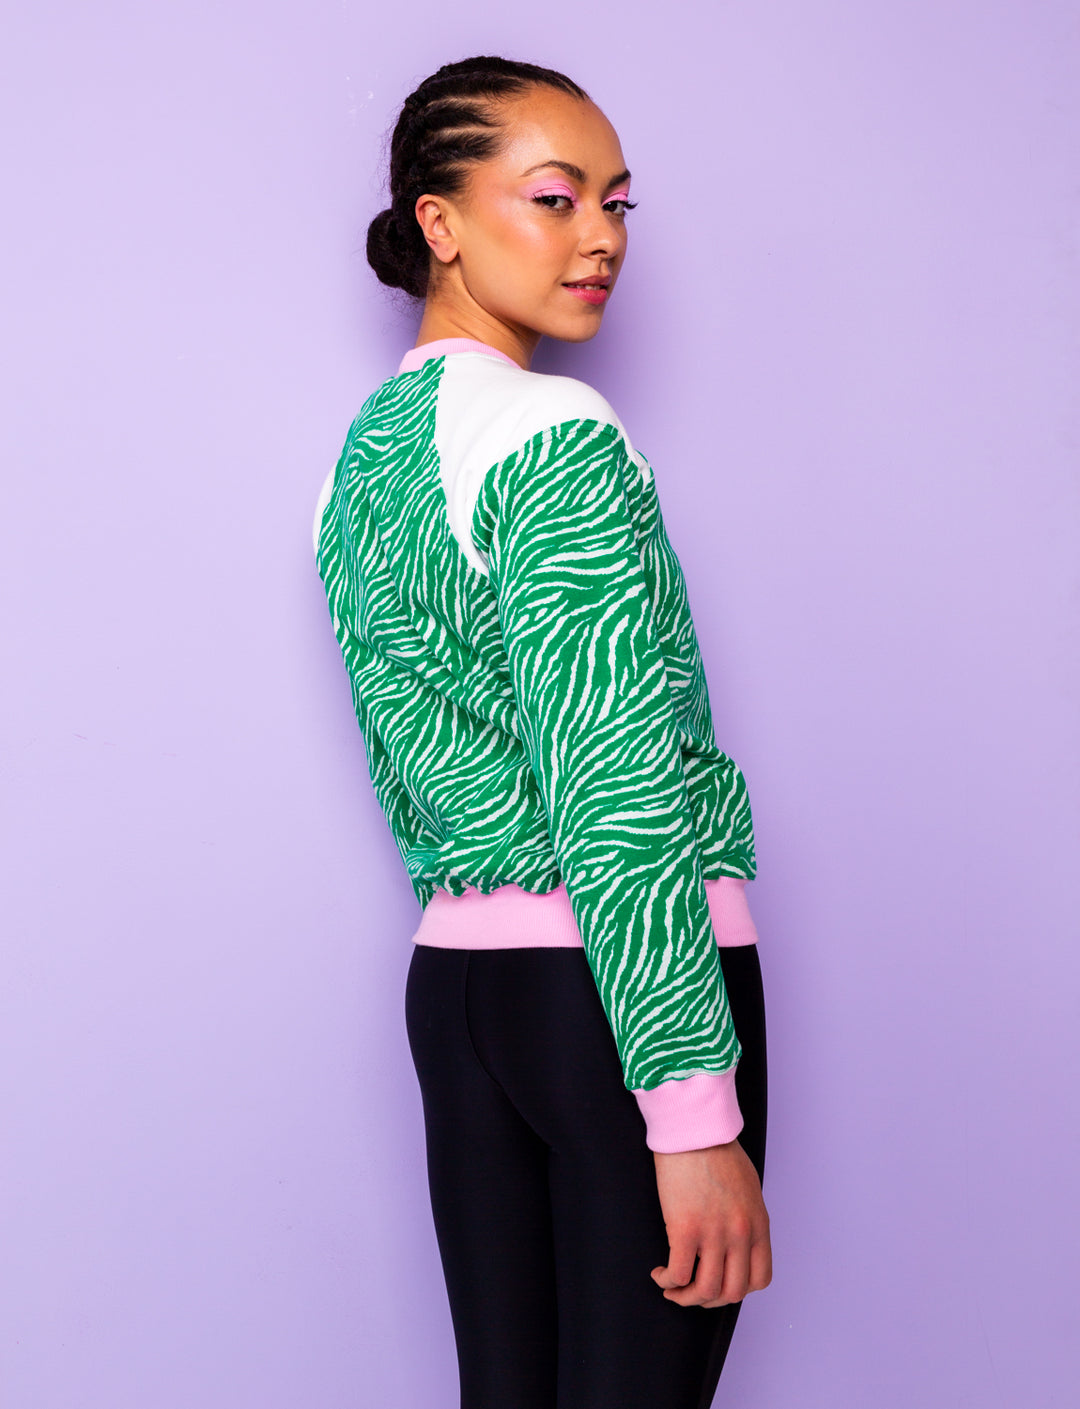 side view of a woman wearing a green zebra print sweatshirt with pink cuffs